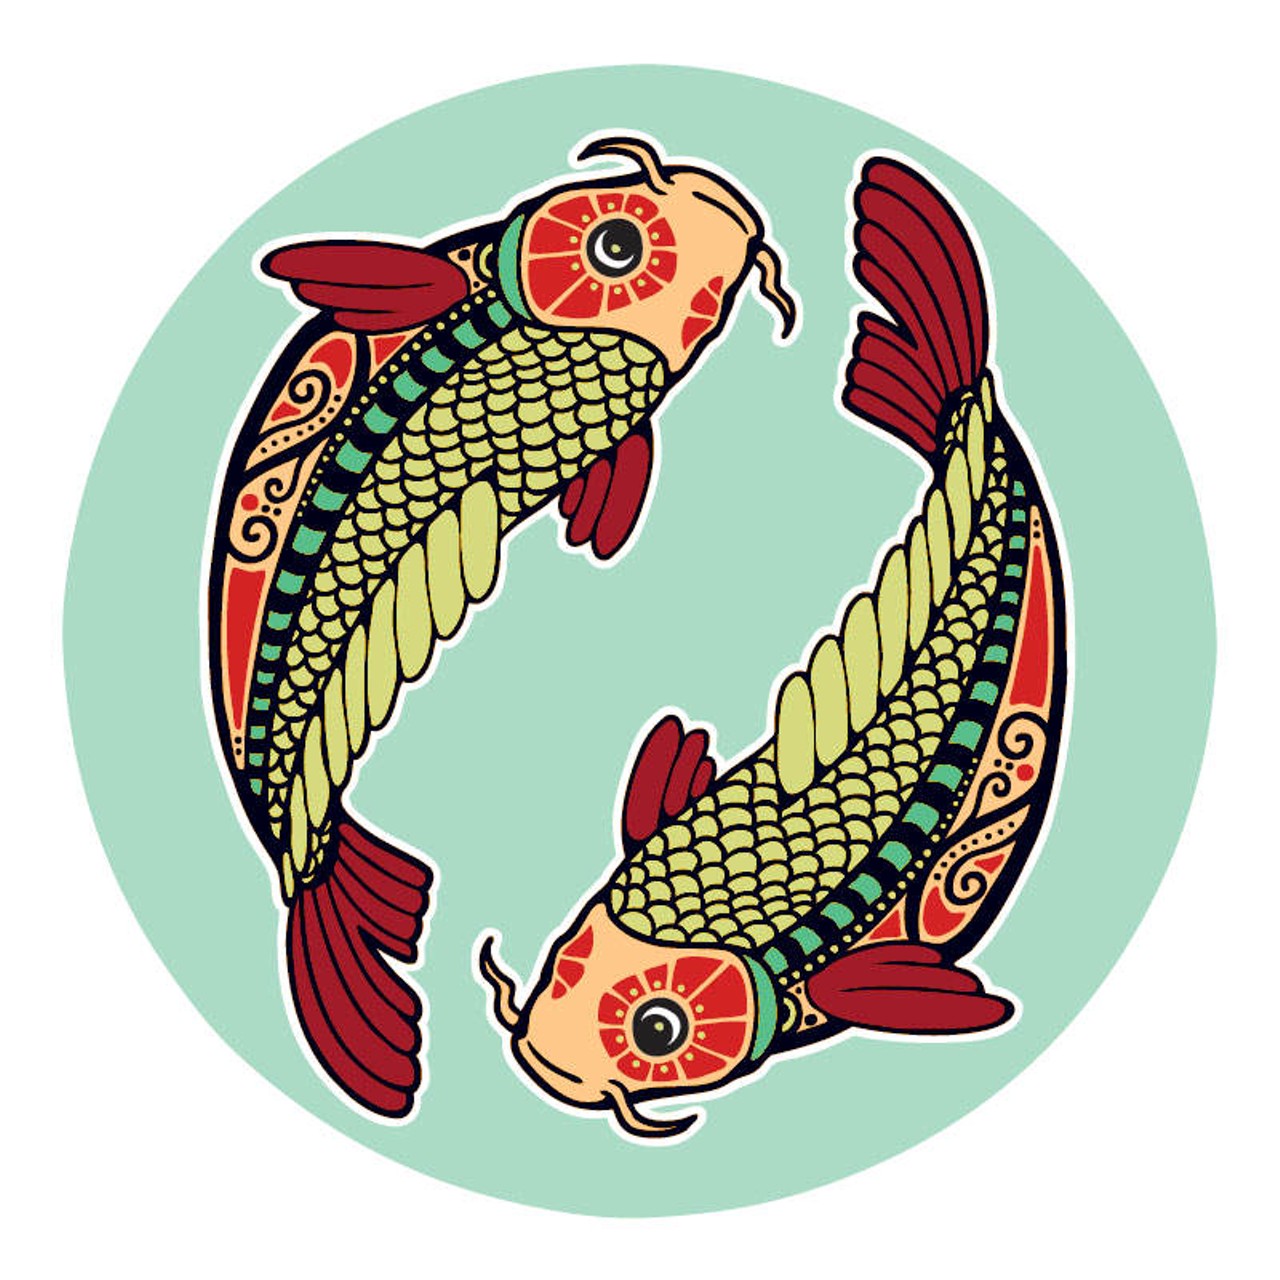 PISCES (Feb. 21-March 20): 
It&#146;s always a mixed bag with you; everything&#146;s OK on the surface, but the inside story is a mix of anxiety that you can never put your finger on. If you&#146;re feeling more neurotic than usual, the things that distract you are ringing up an enormous amount of fear. It&#146;s all in your mind, but when it gets the best of you, you start making things up in your head and convincing yourself that they&#146;re true. If the cure for this lies in being able to stop the madness long enough to get back to realizing that life is what we make it, a deep breath could be all it takes to restore your sanity.